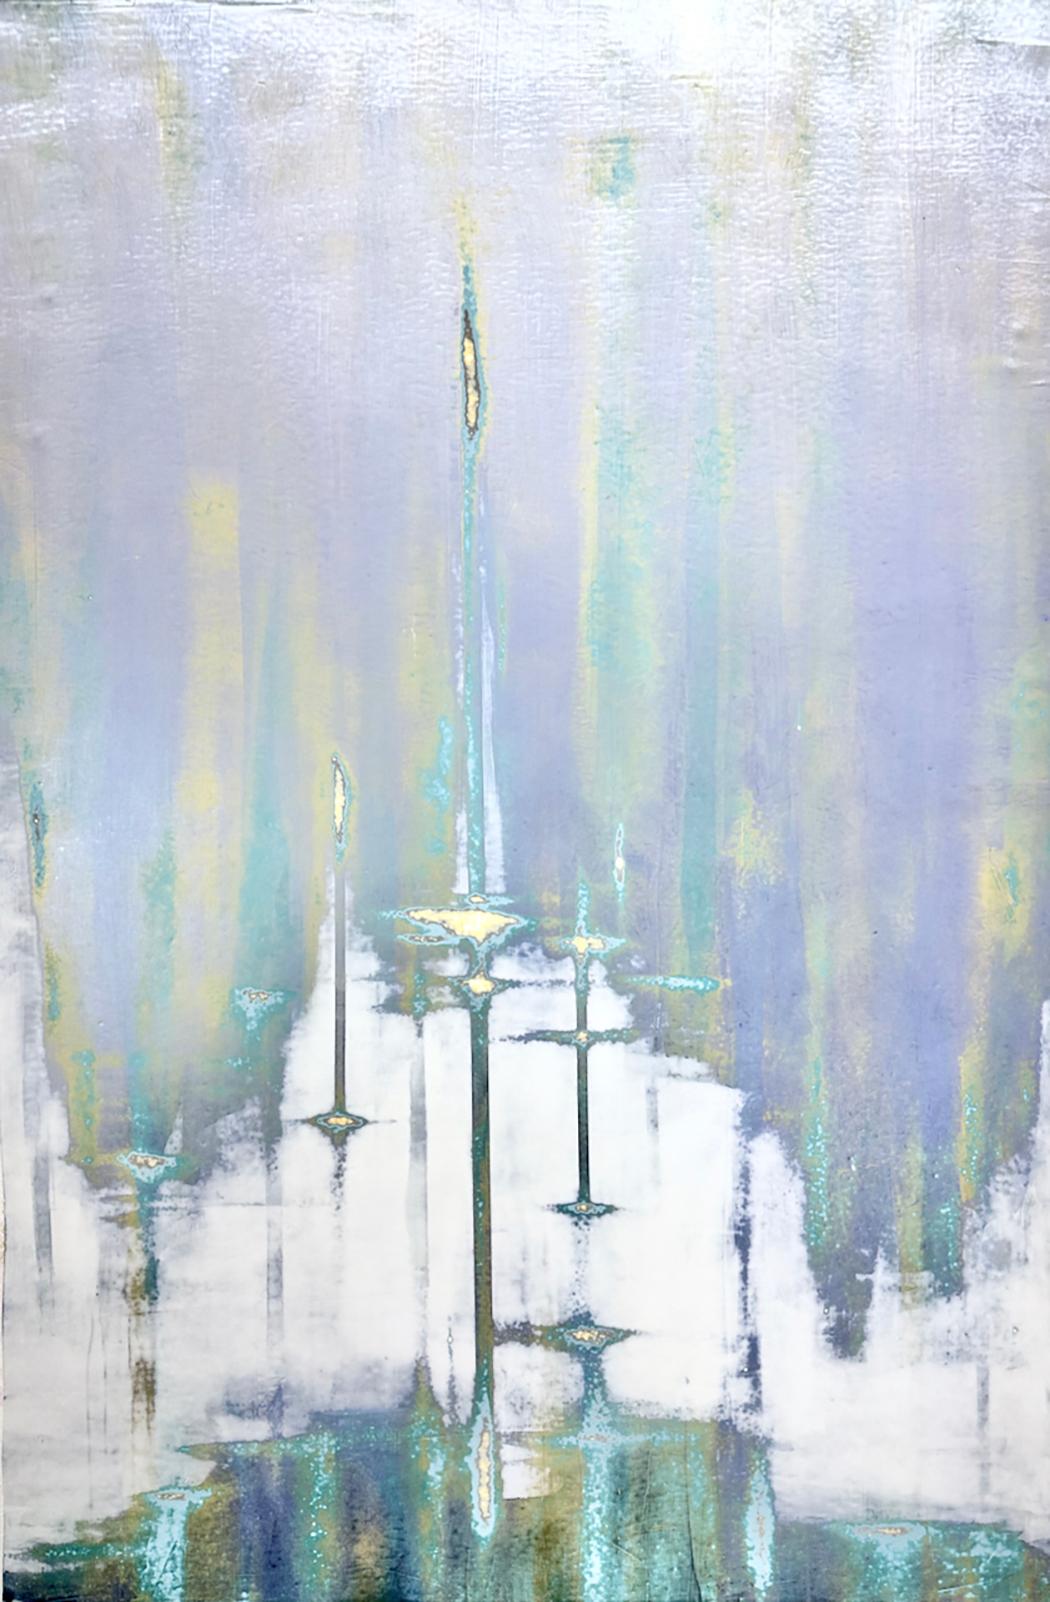 Abstract_Violet_Mixed Media_Metallic_Acrylic/Plaster_Audra Weaser_Pearl Dives